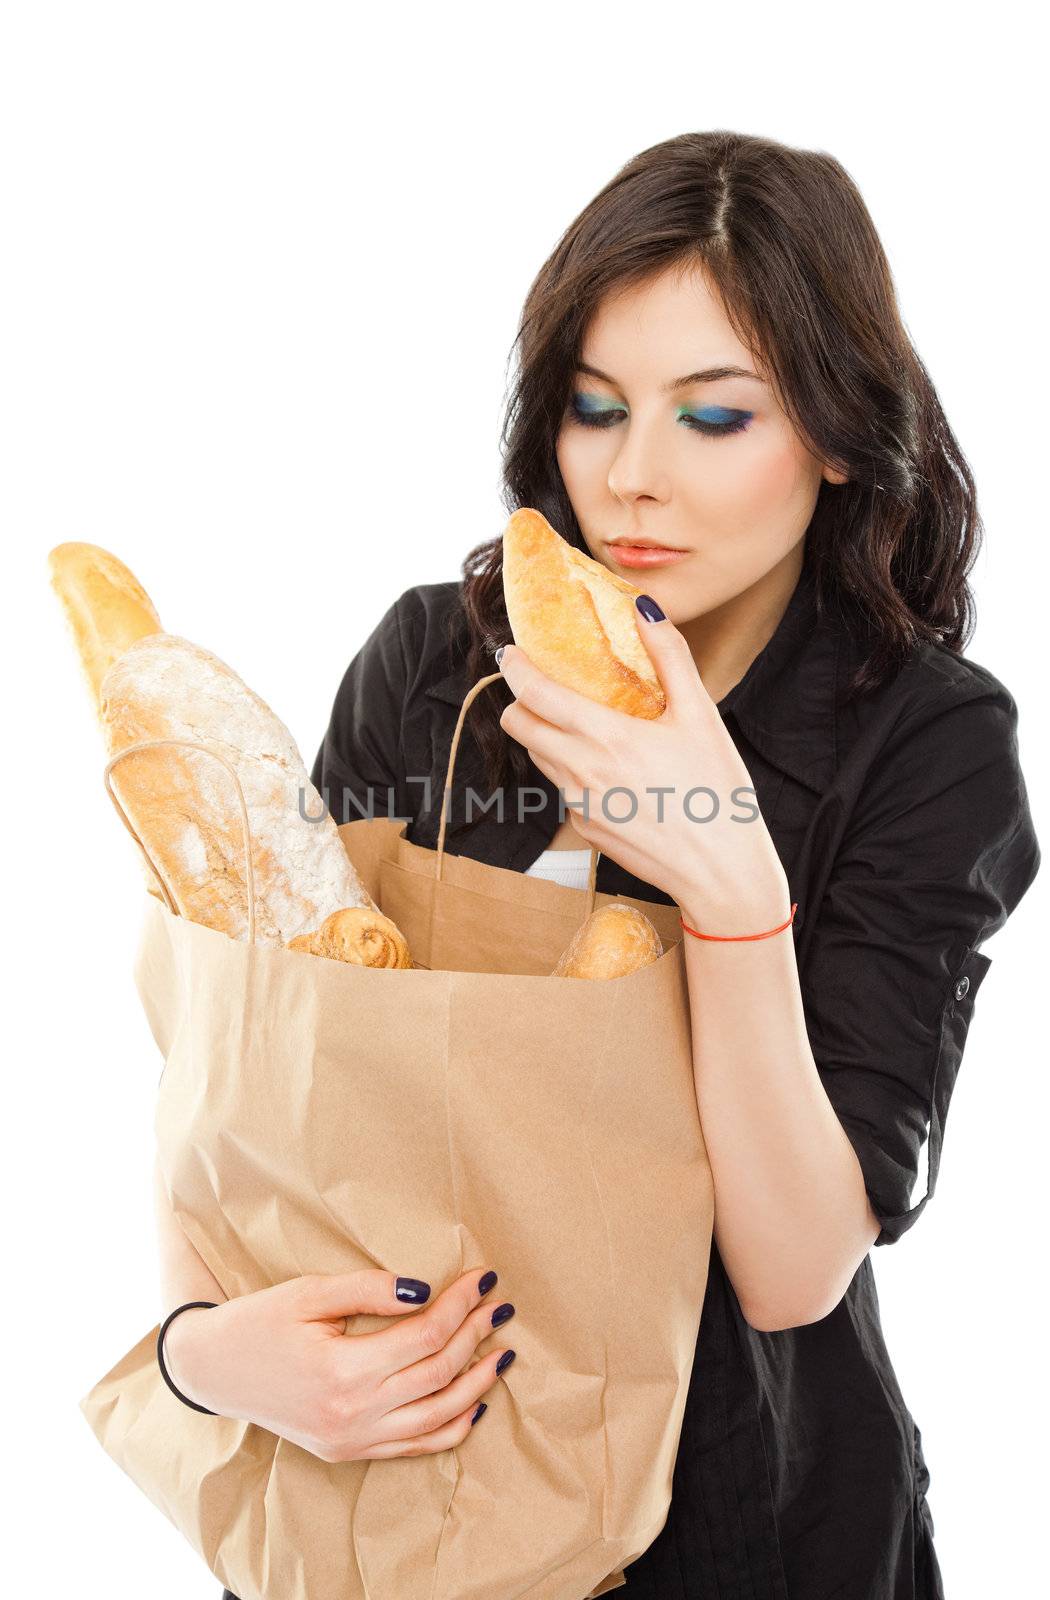 Beautiful female holding shopping bag full of bread, smelling a small baguette